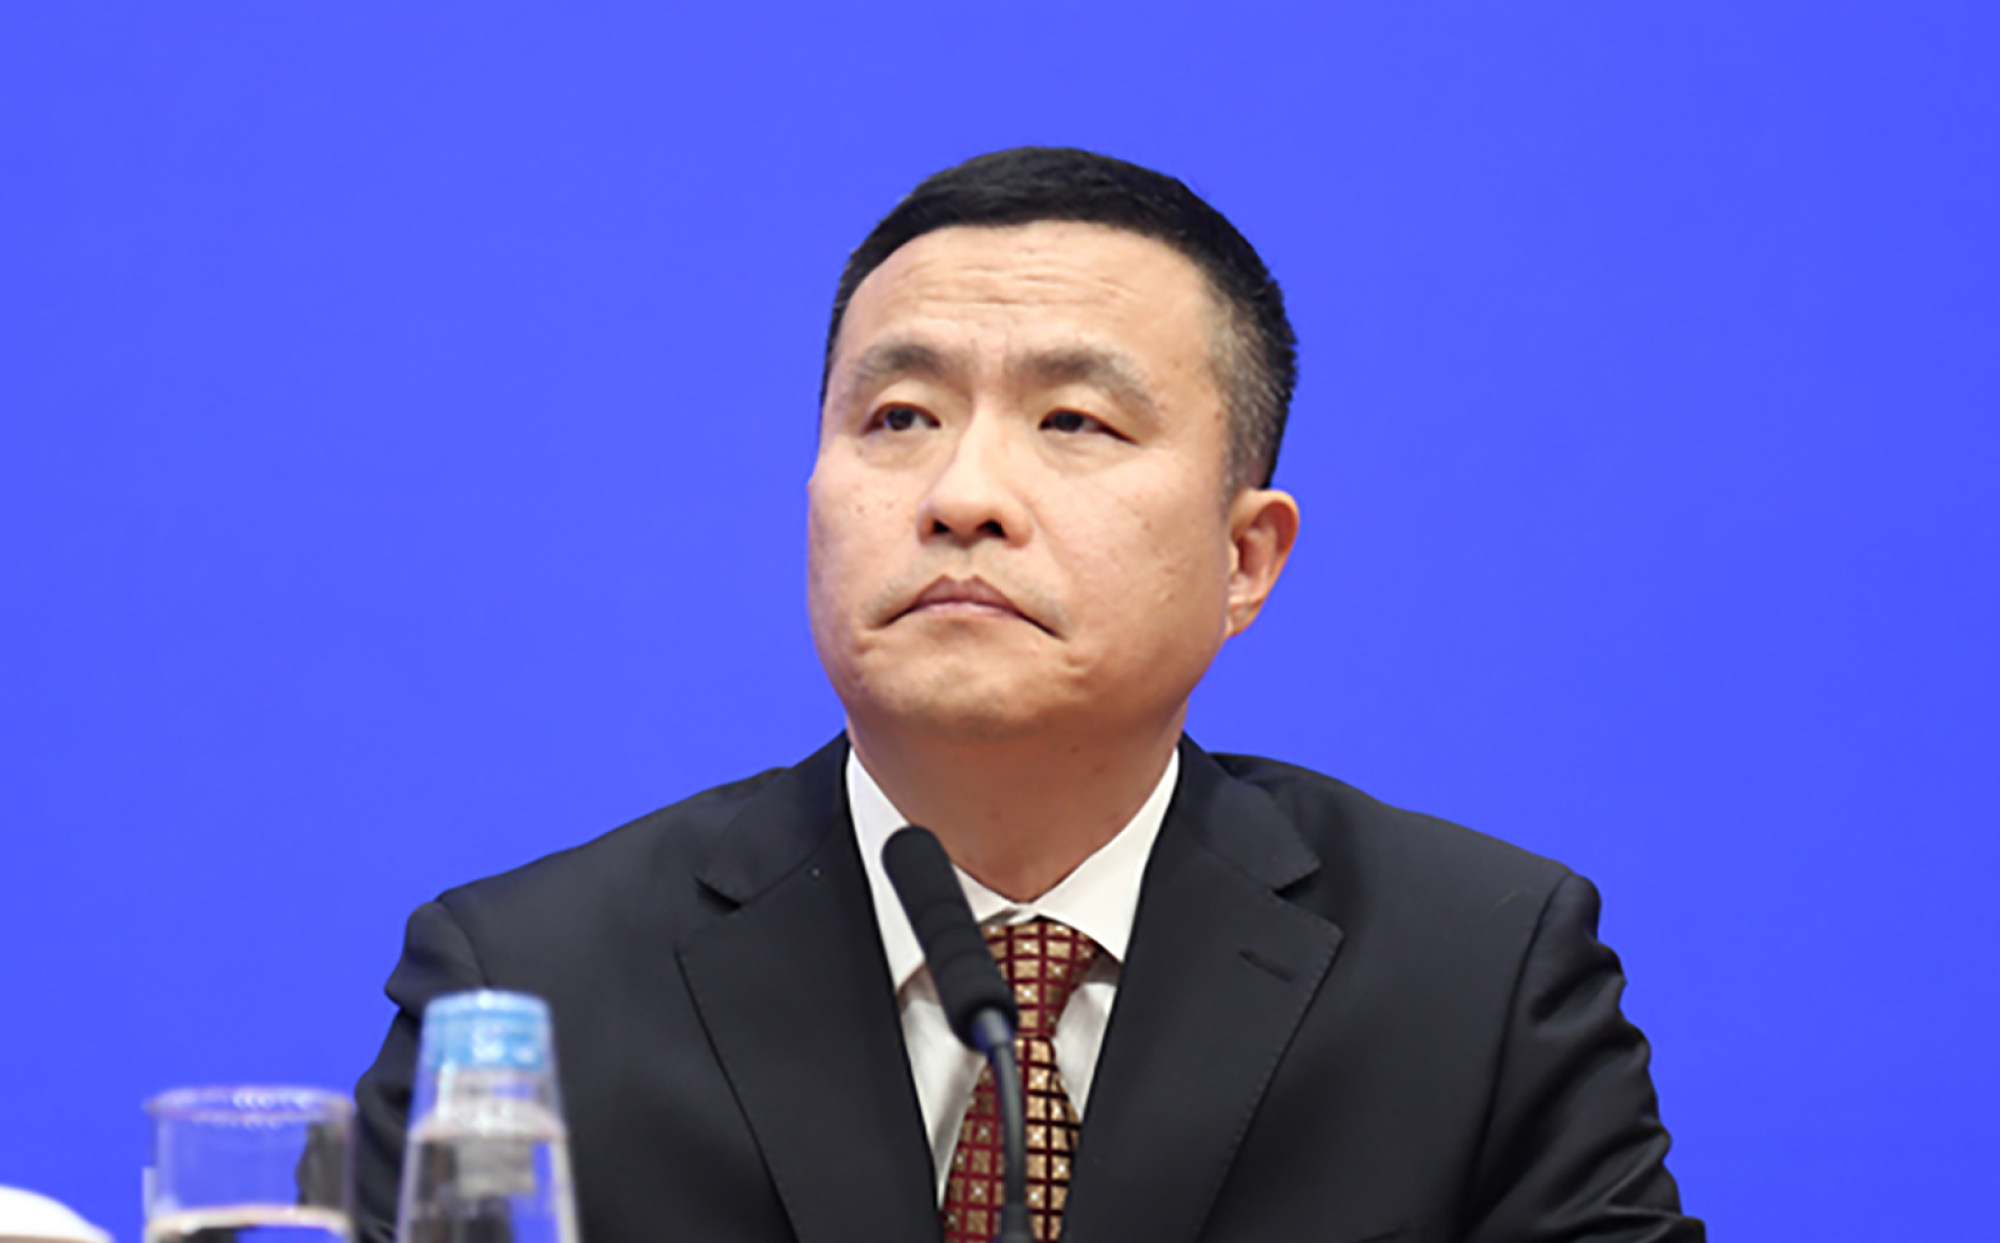 Sun Zezhou is chief designer of China’s first Mars mission Tianwen 1 and the Chang’e 3 and Chang’e 4 lunar missions. Photo: China State Council Information Office